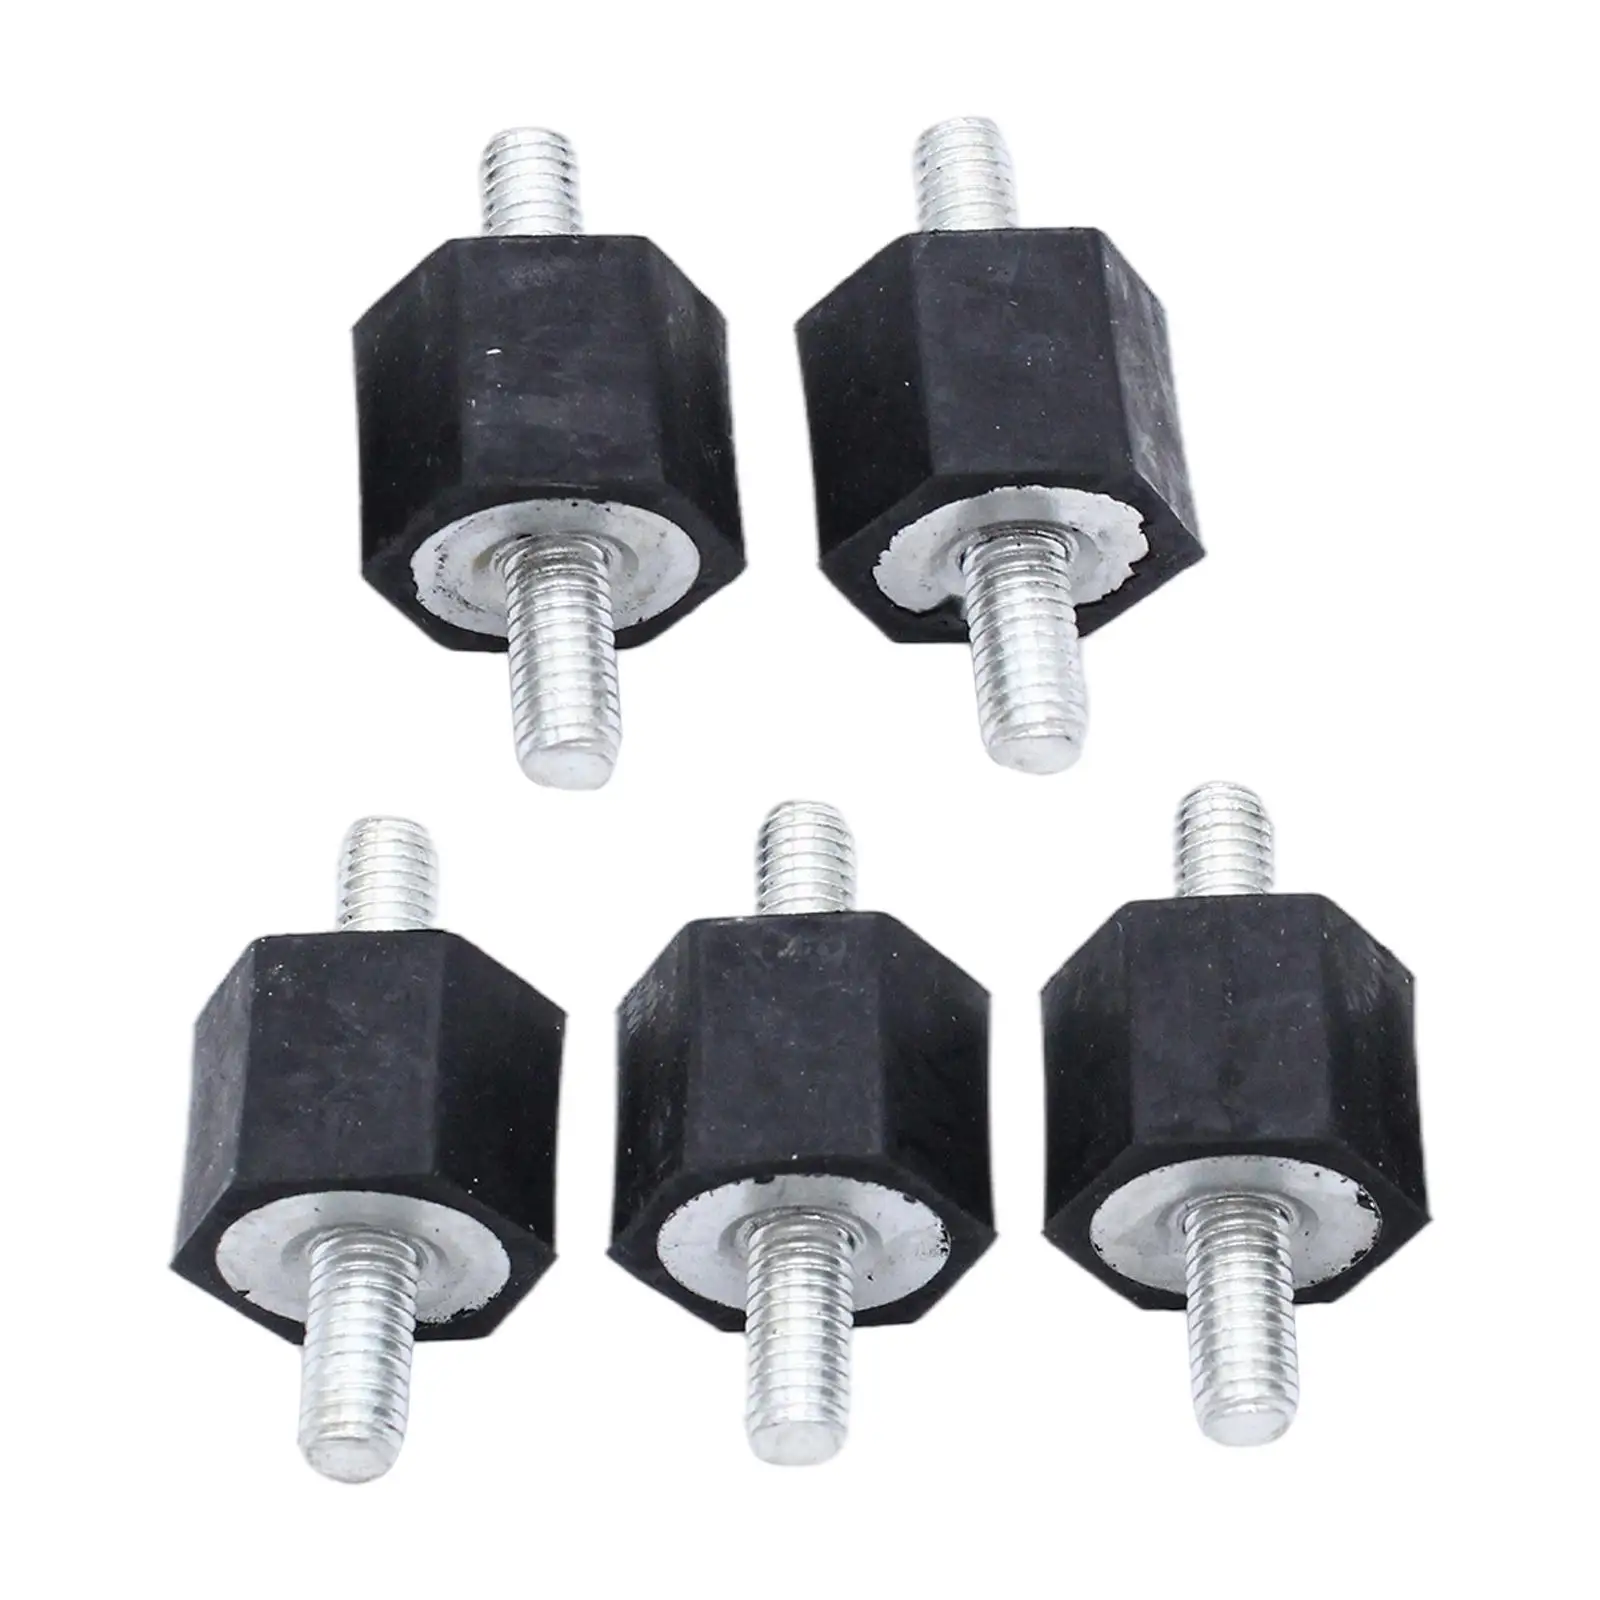 5x Rubber Mounts Shock Absorbers for Golf MK2 for B4 Front Mount Intercoolers